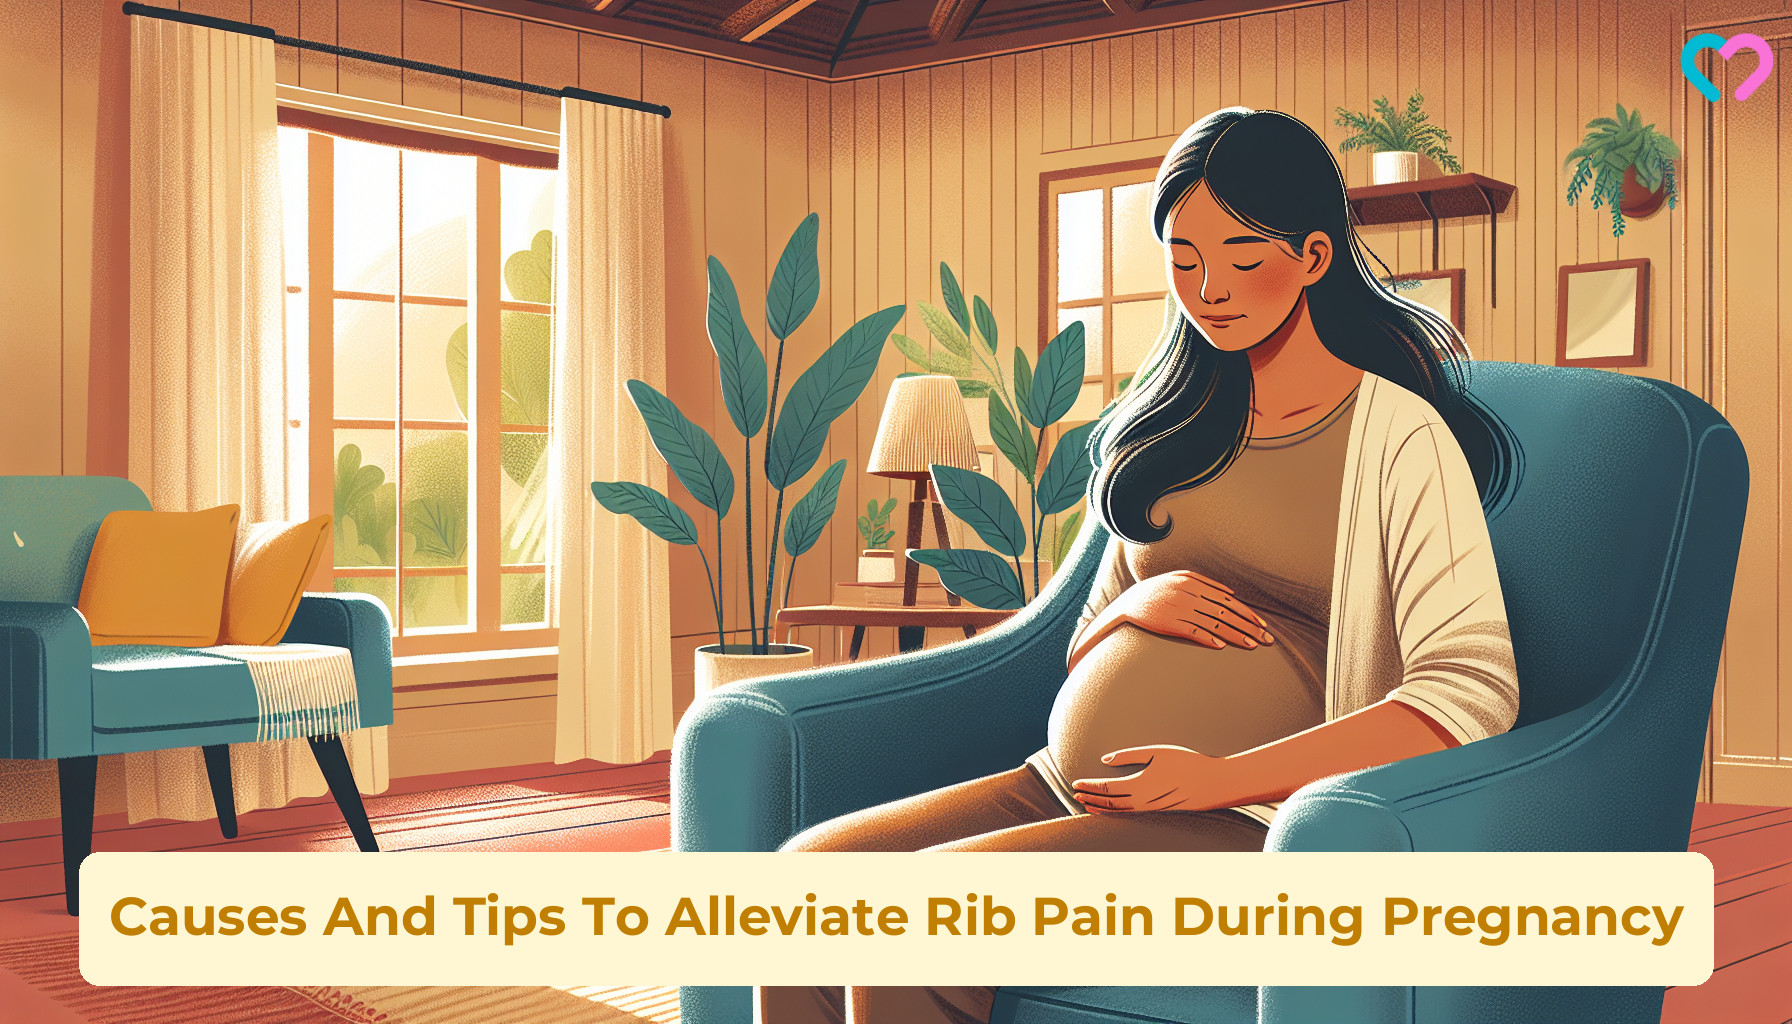 ribs pain during pregnancy_illustration